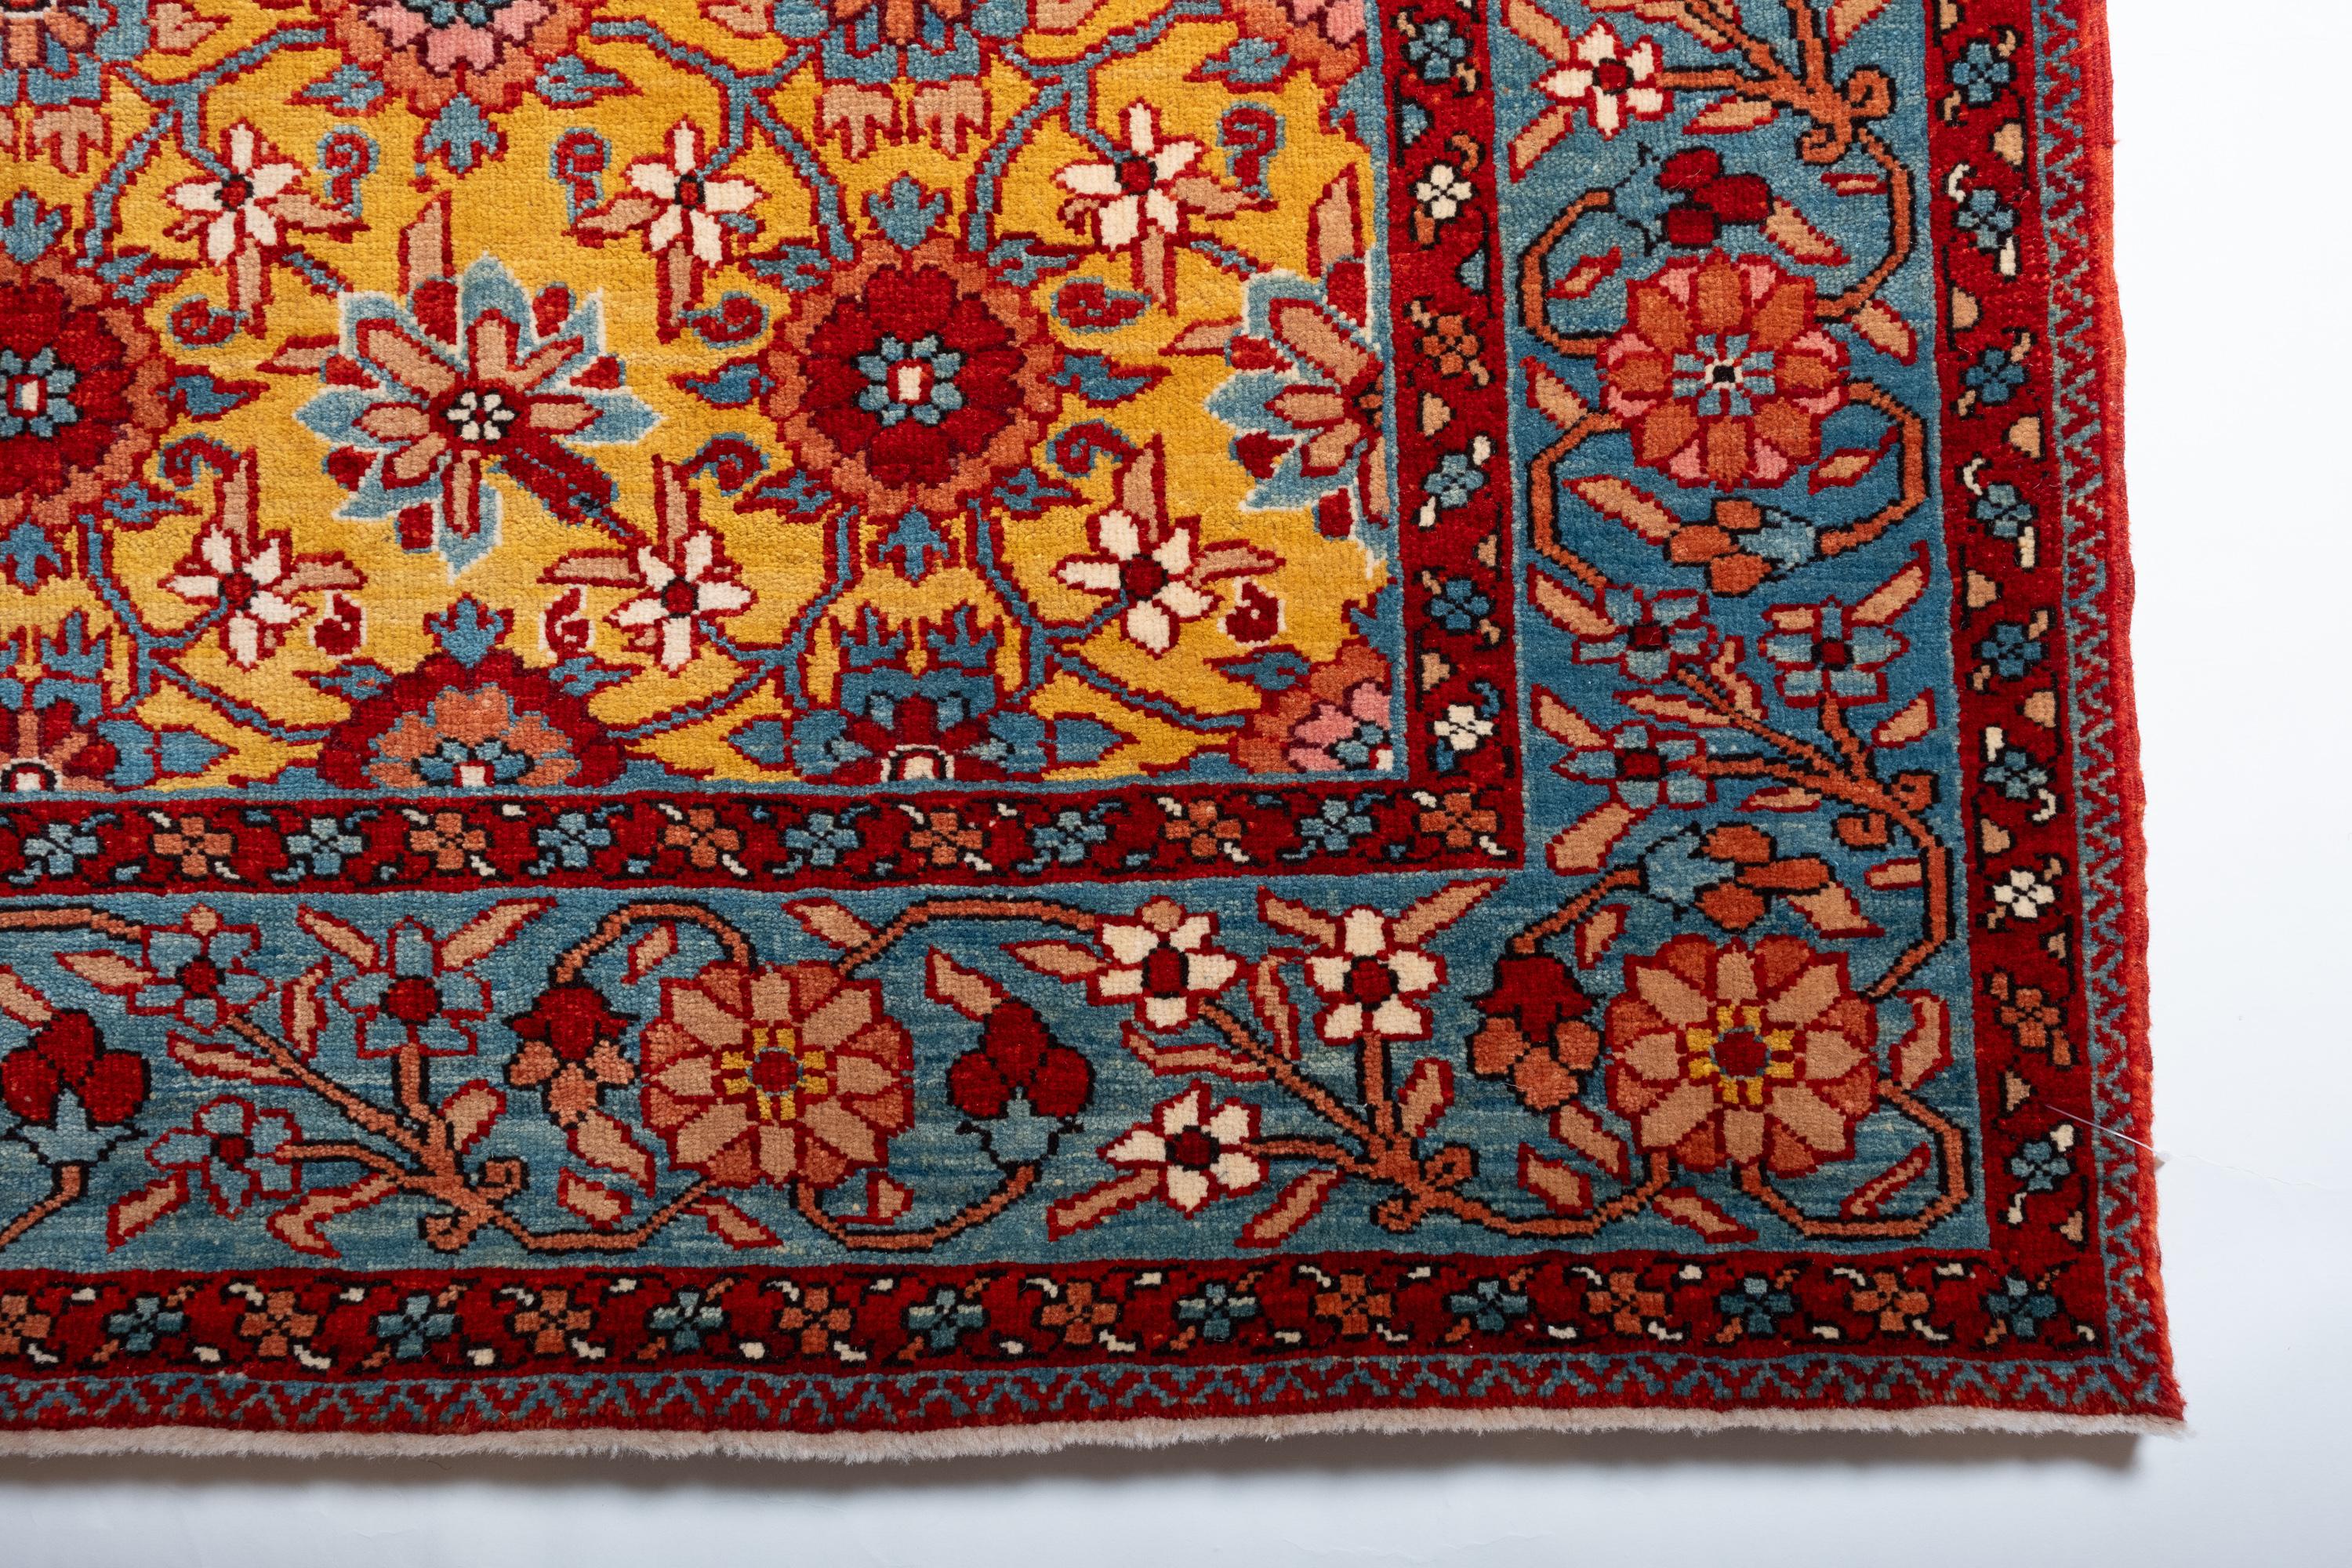 The source of the rug comes from the book Antique Rugs of Kurdistan A Historical Legacy of Woven Art, James D. Burns, 2002 nr.2. This was an exclusive example of a Mina Khani lattice design mid-19th century rug from Koliya’i, Southern Kurdistan